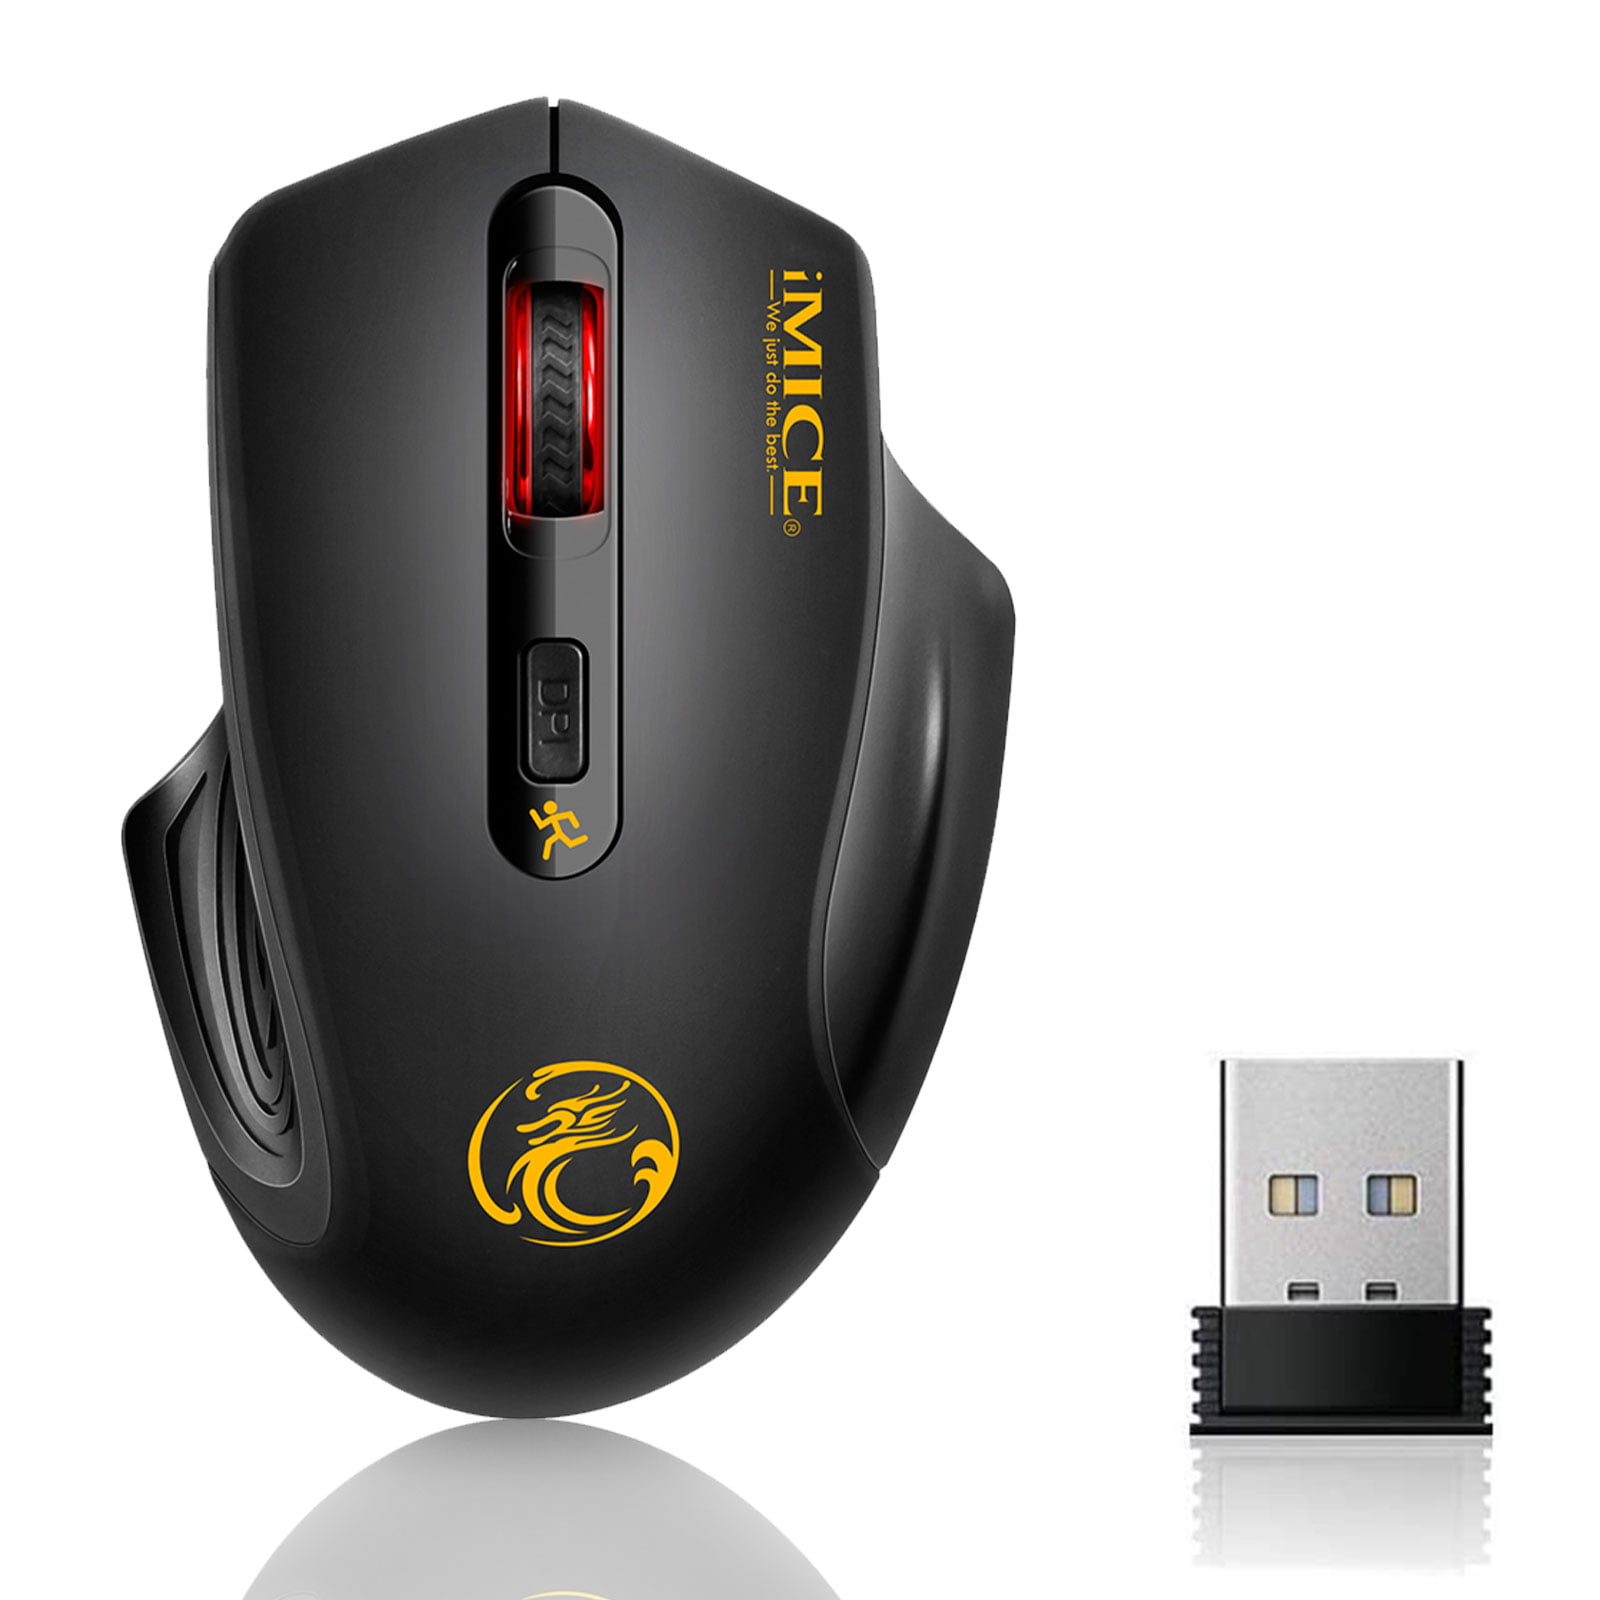 2.4GHz DPI Adjustable USB Wireless Opticals Gaming Mouse Mice For PC/Chromebook! 